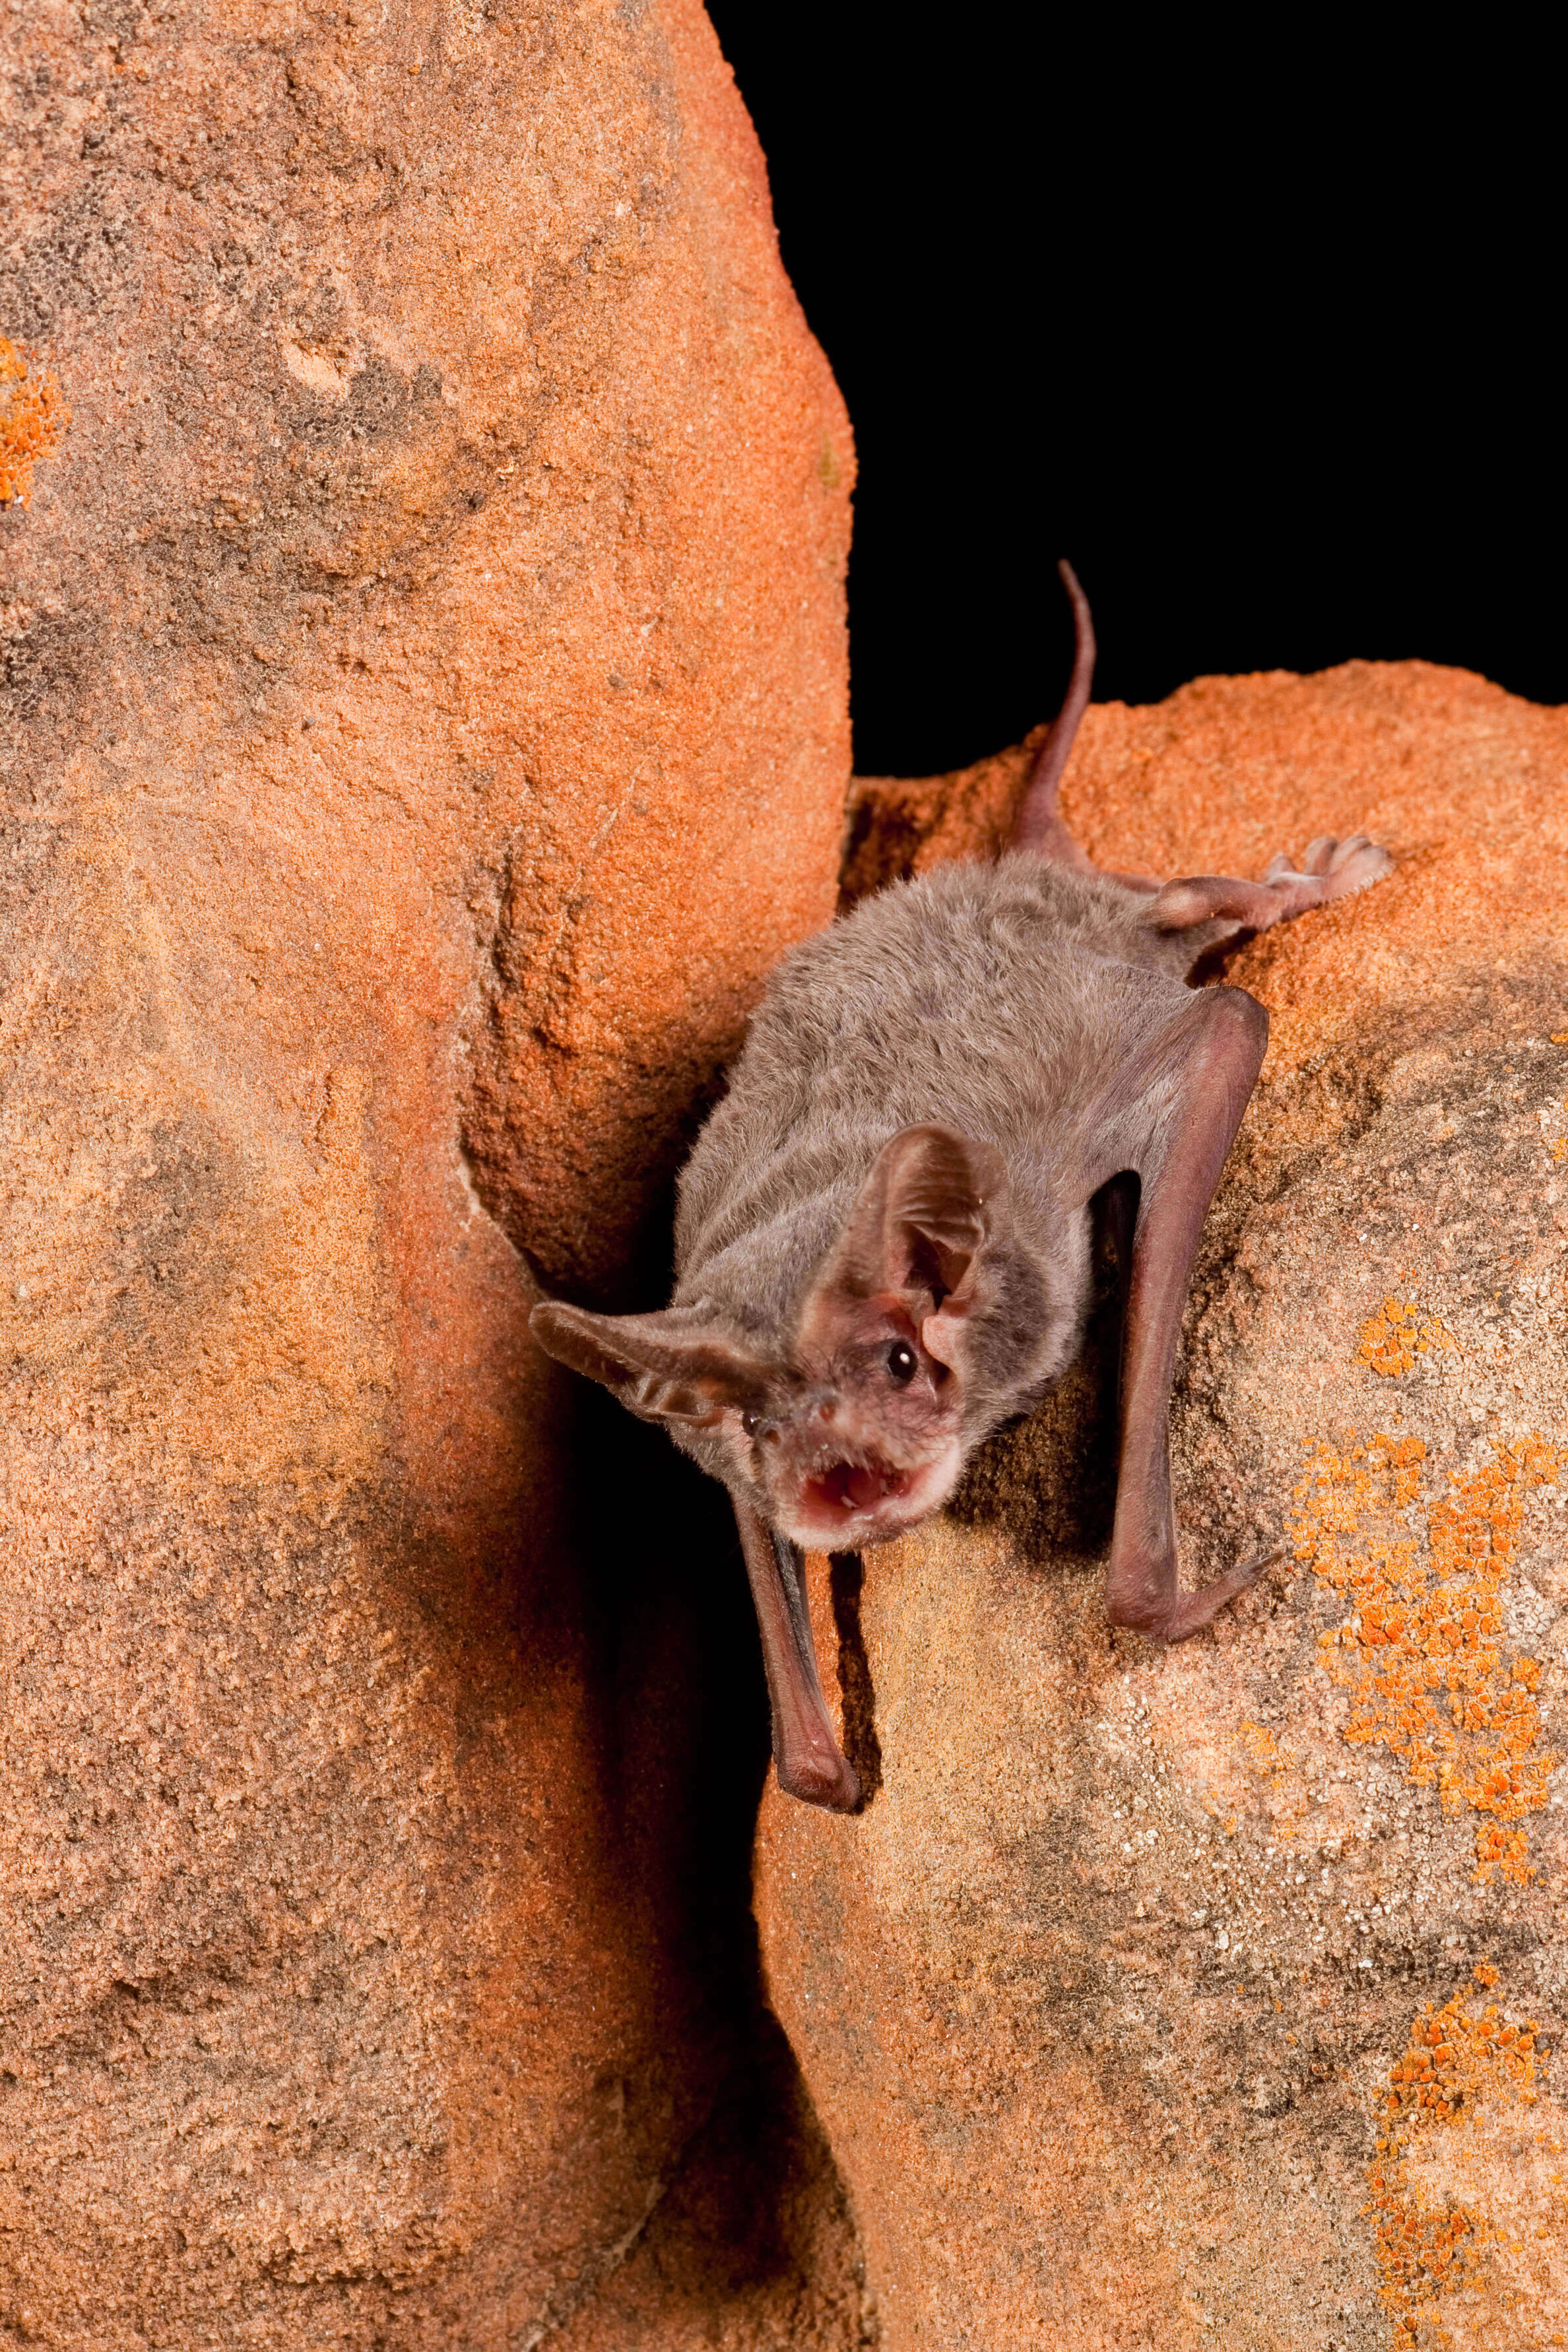 Mexican free-tailed bat crawling on a rock